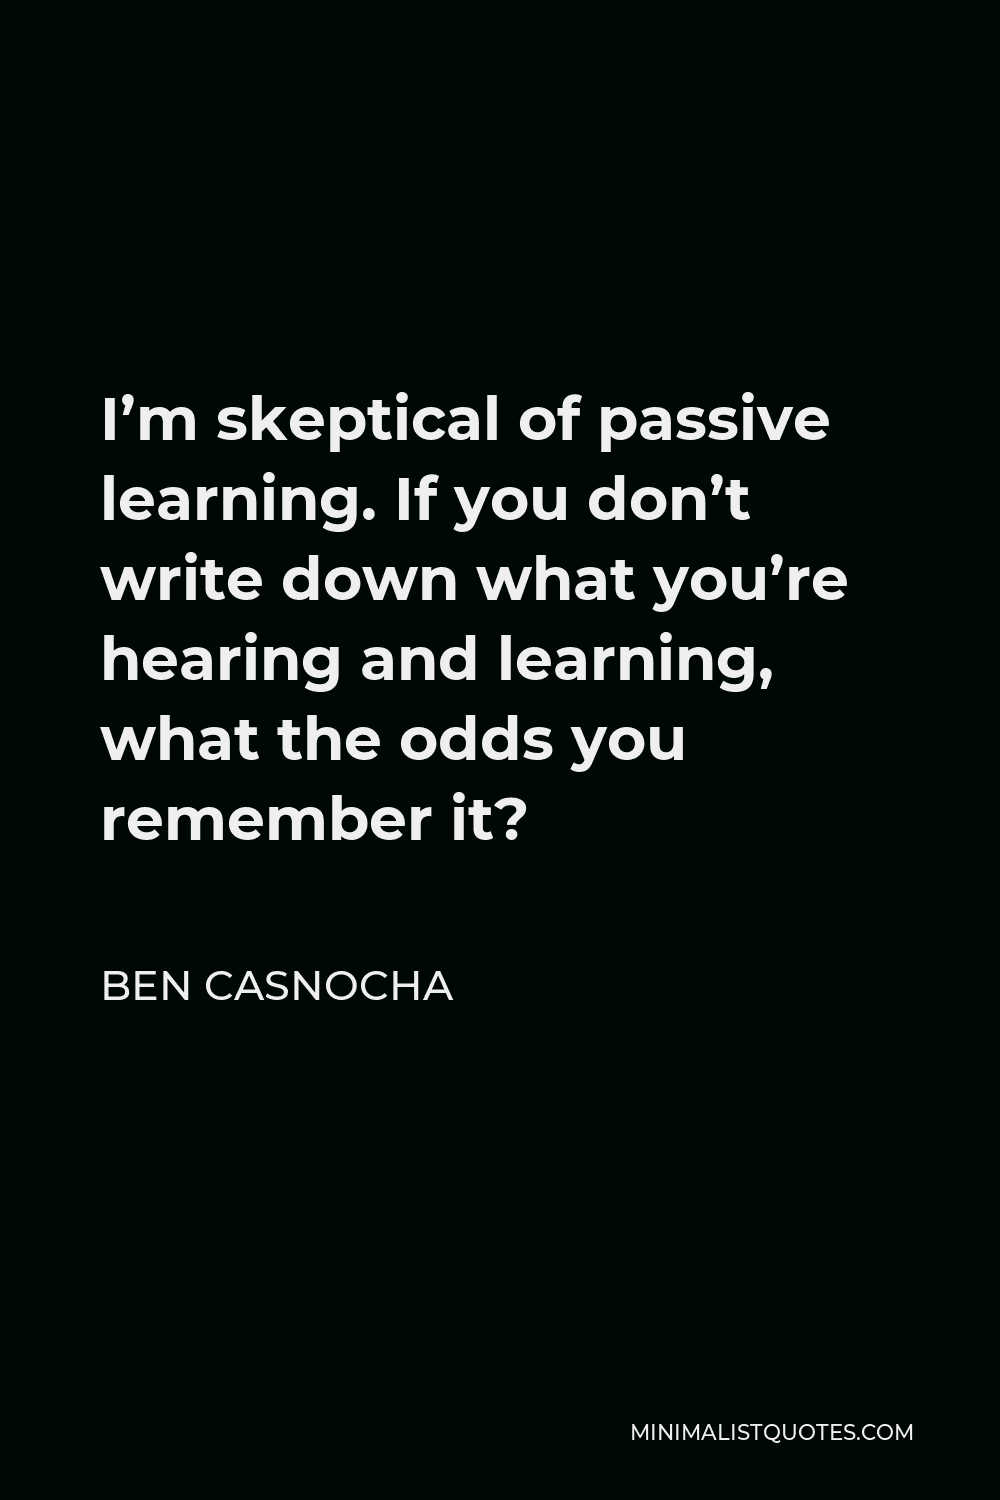 Ben Casnocha Quote - I’m skeptical of passive learning. If you don’t write down what you’re hearing and learning, what the odds you remember it?